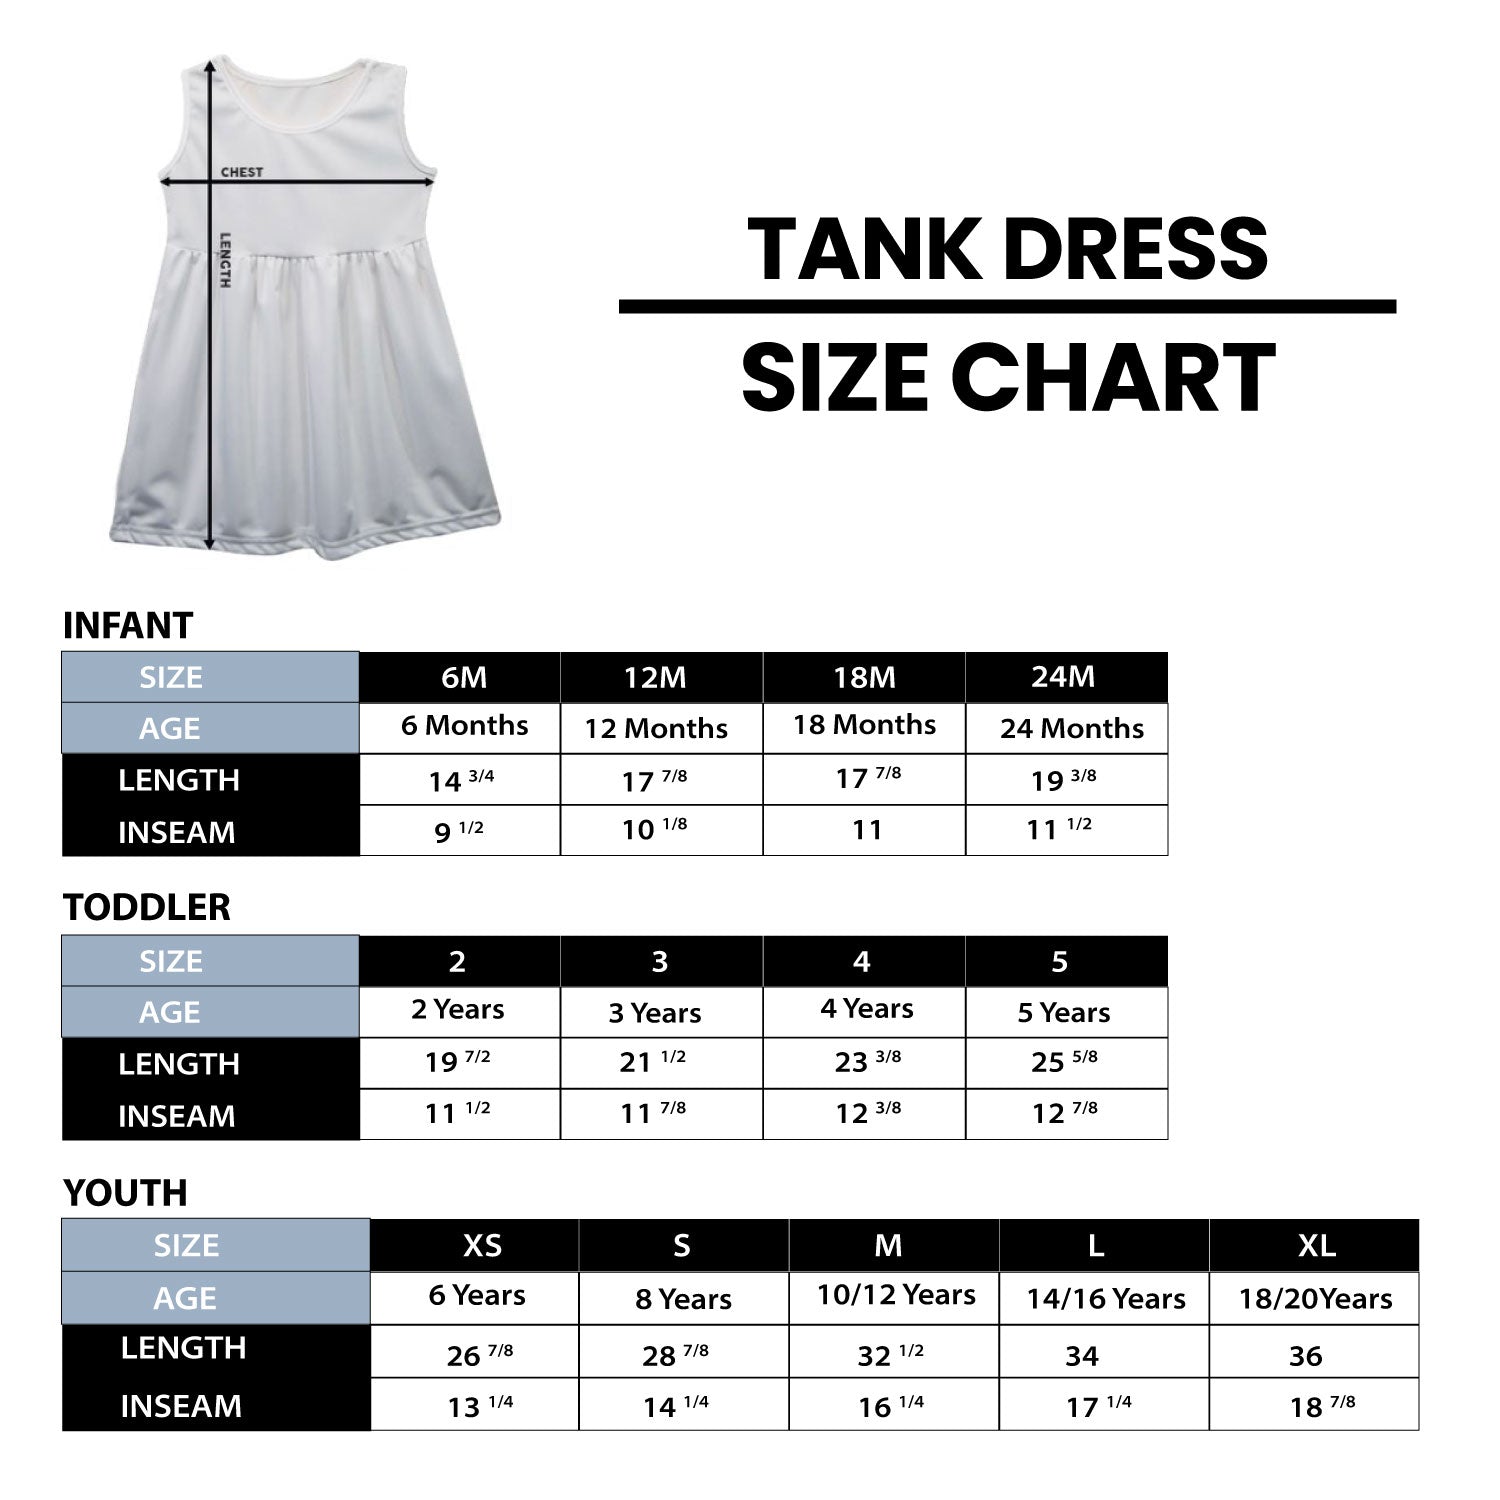 Sizing Chart - Tulleen.com